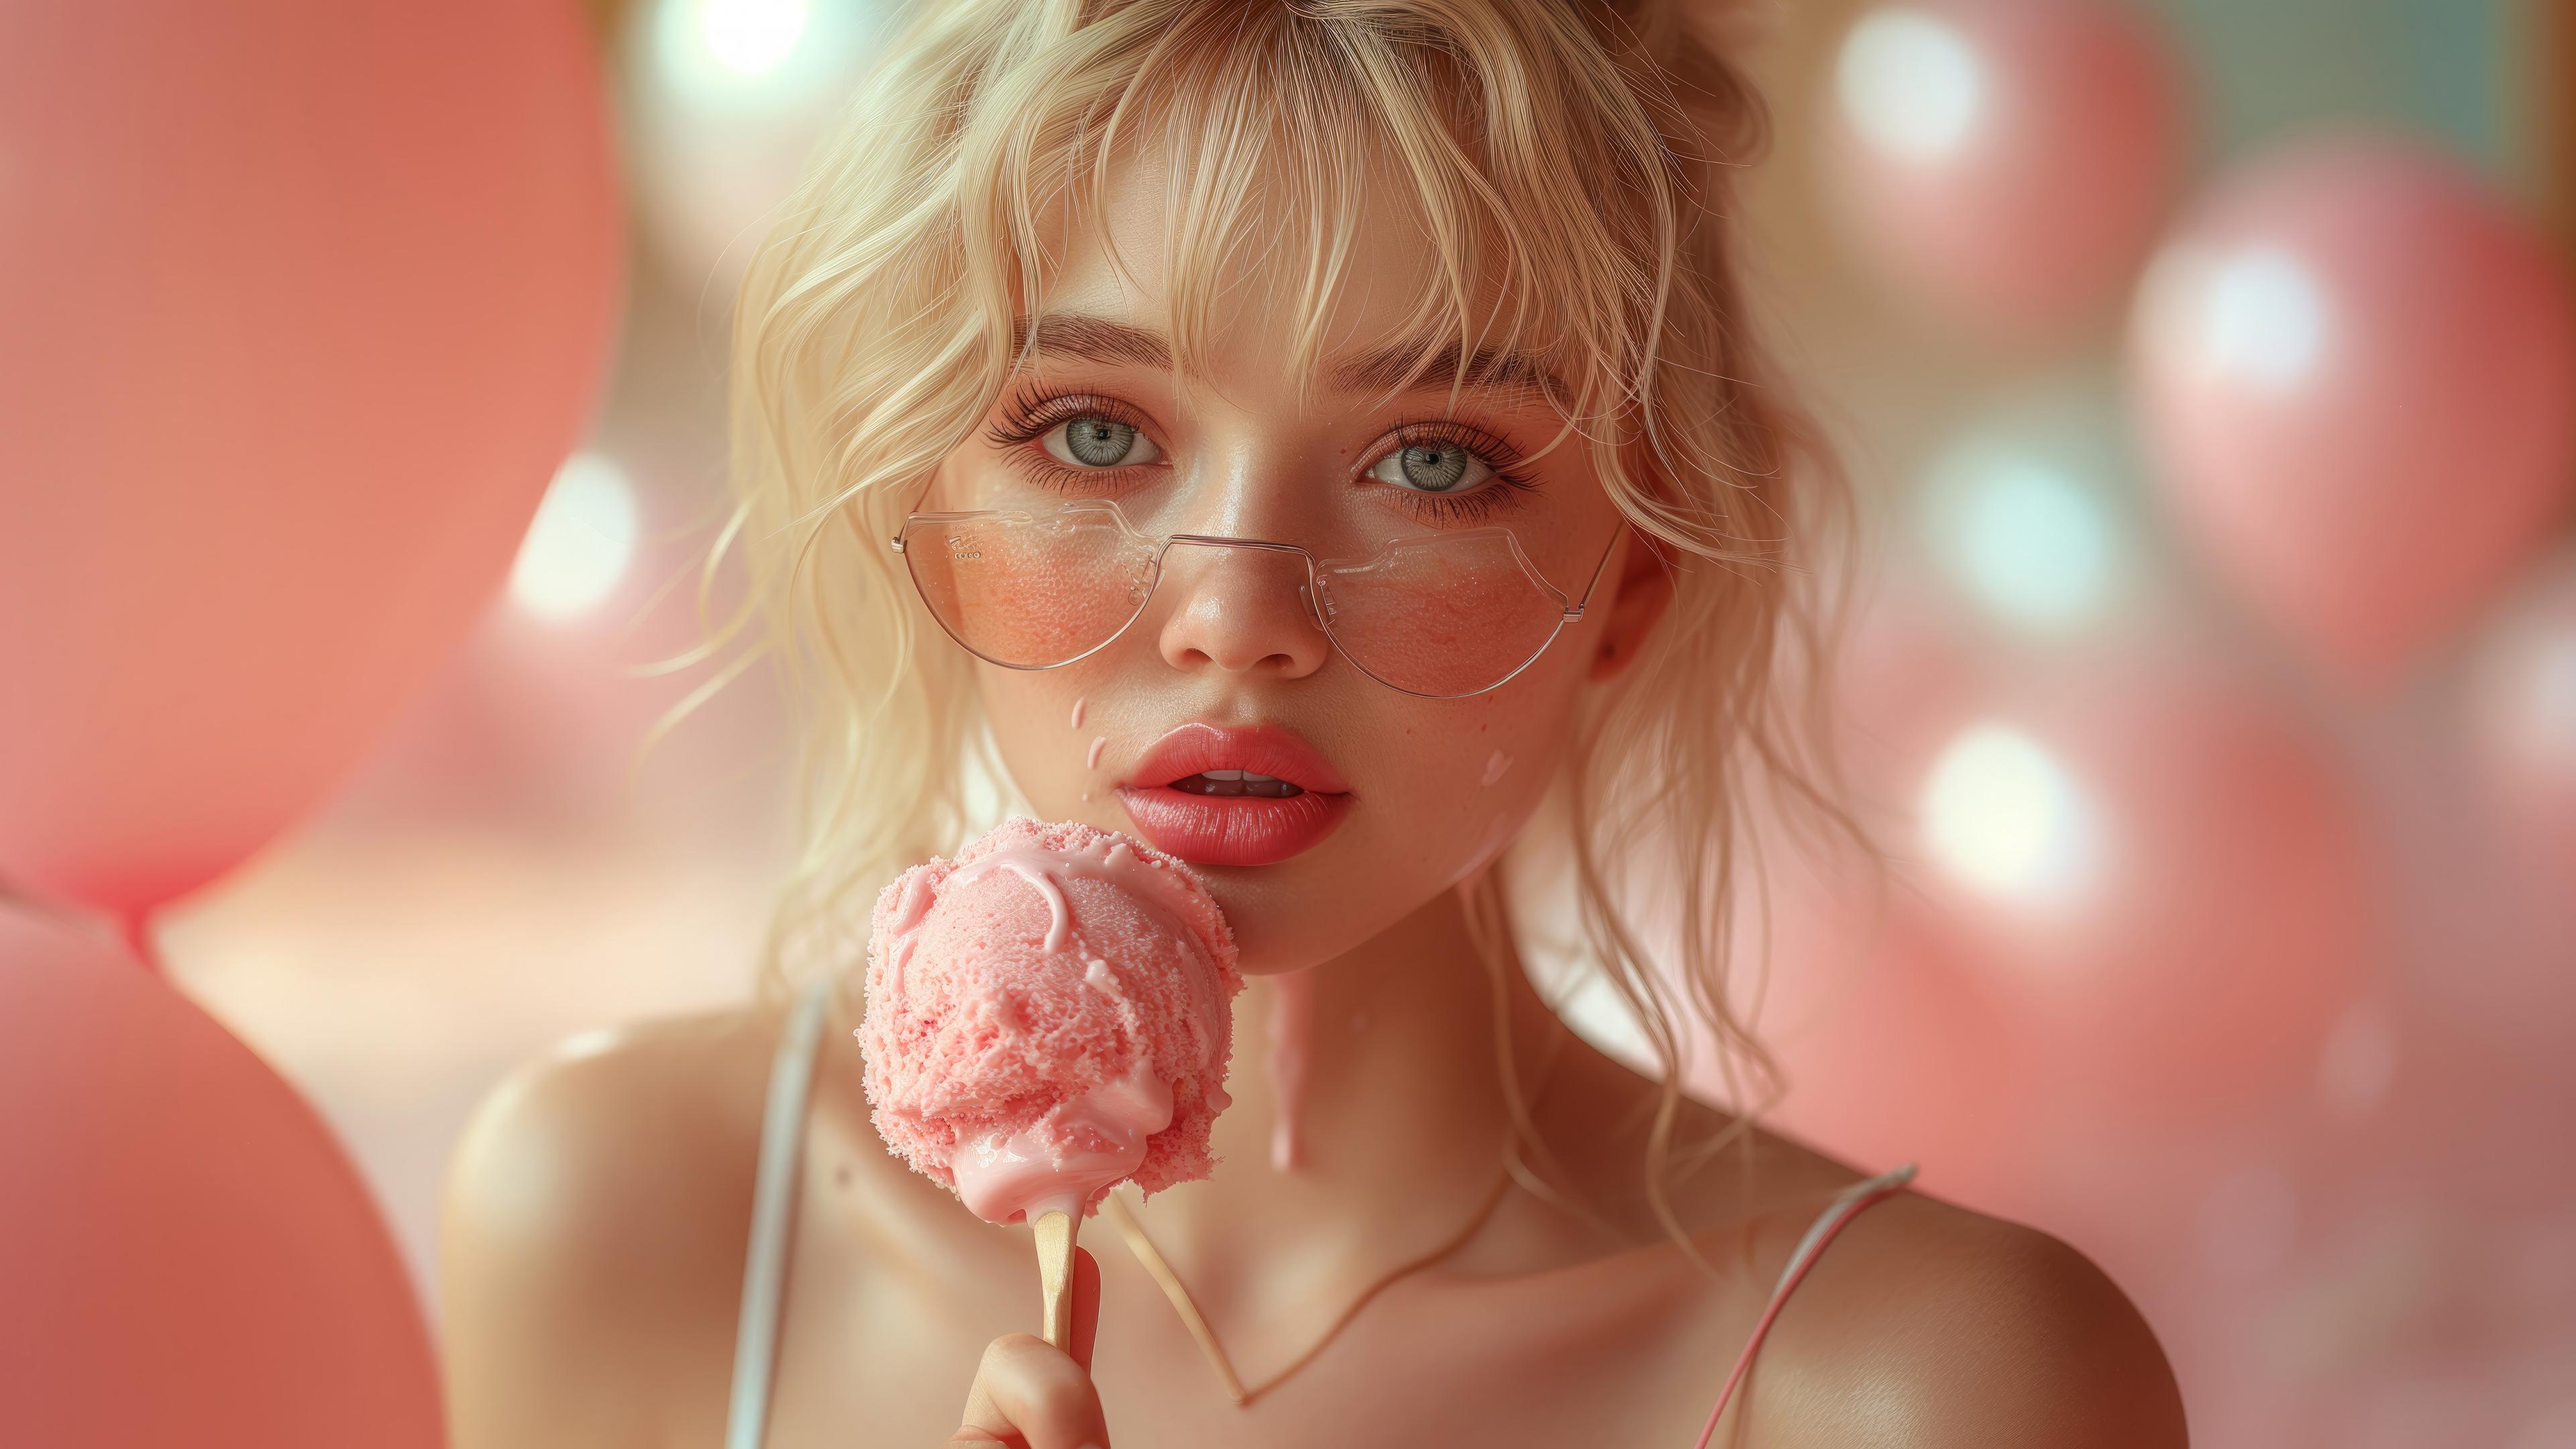 Beautiful blonde girl with ice cream 4k pc wallpaper | PC and Mobile Wallpapers